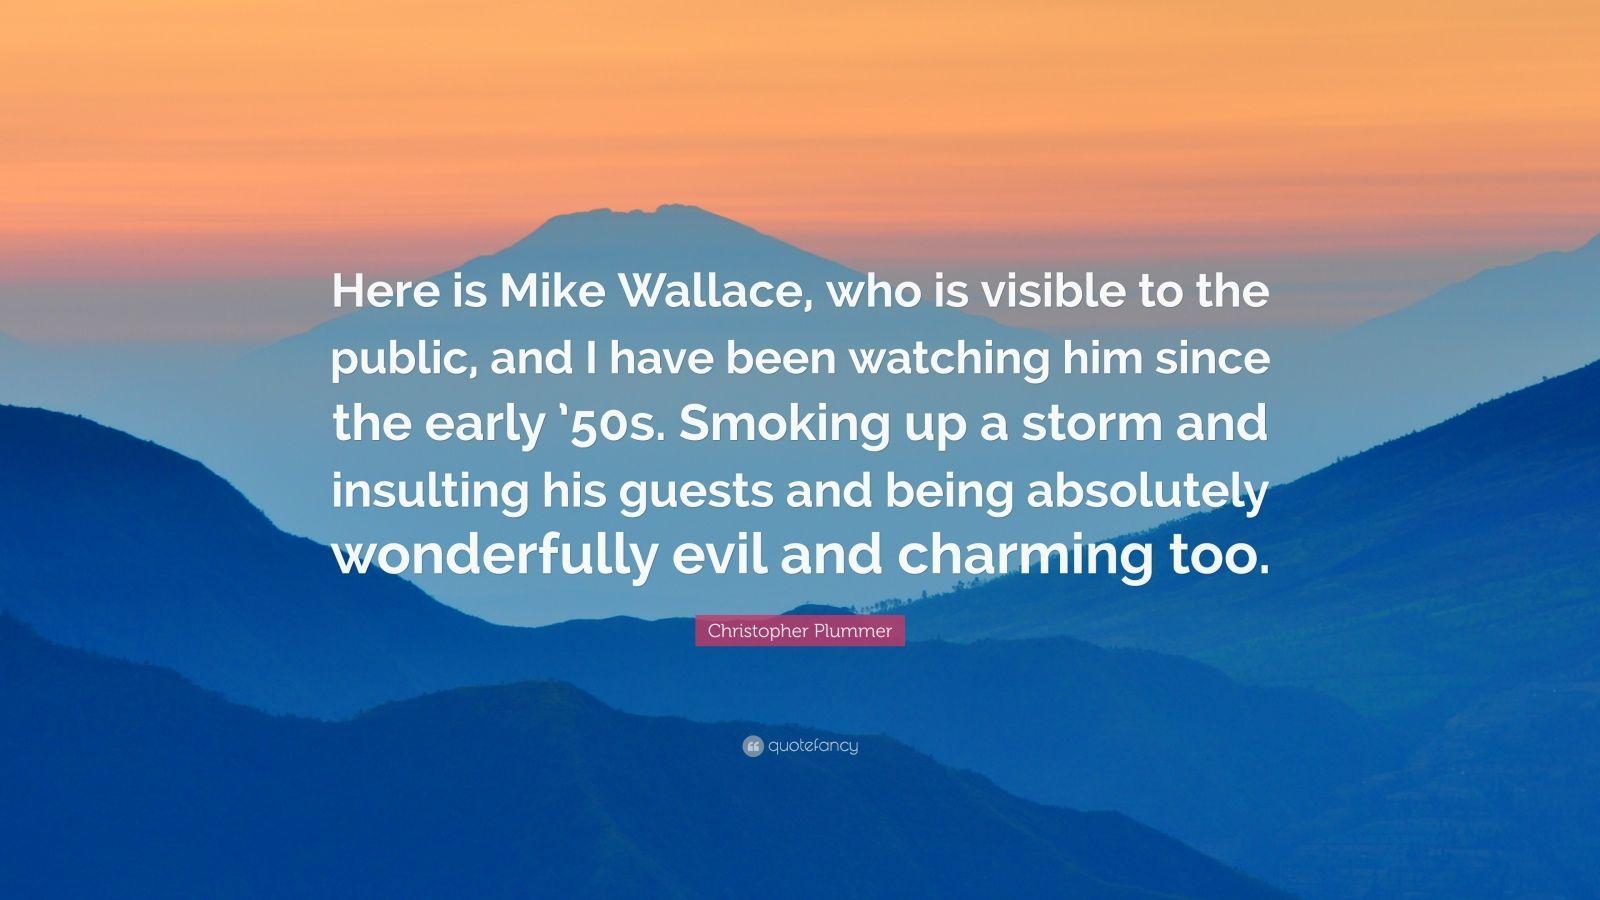 Christopher Plummer Quote: “Here is Mike Wallace, who is visible